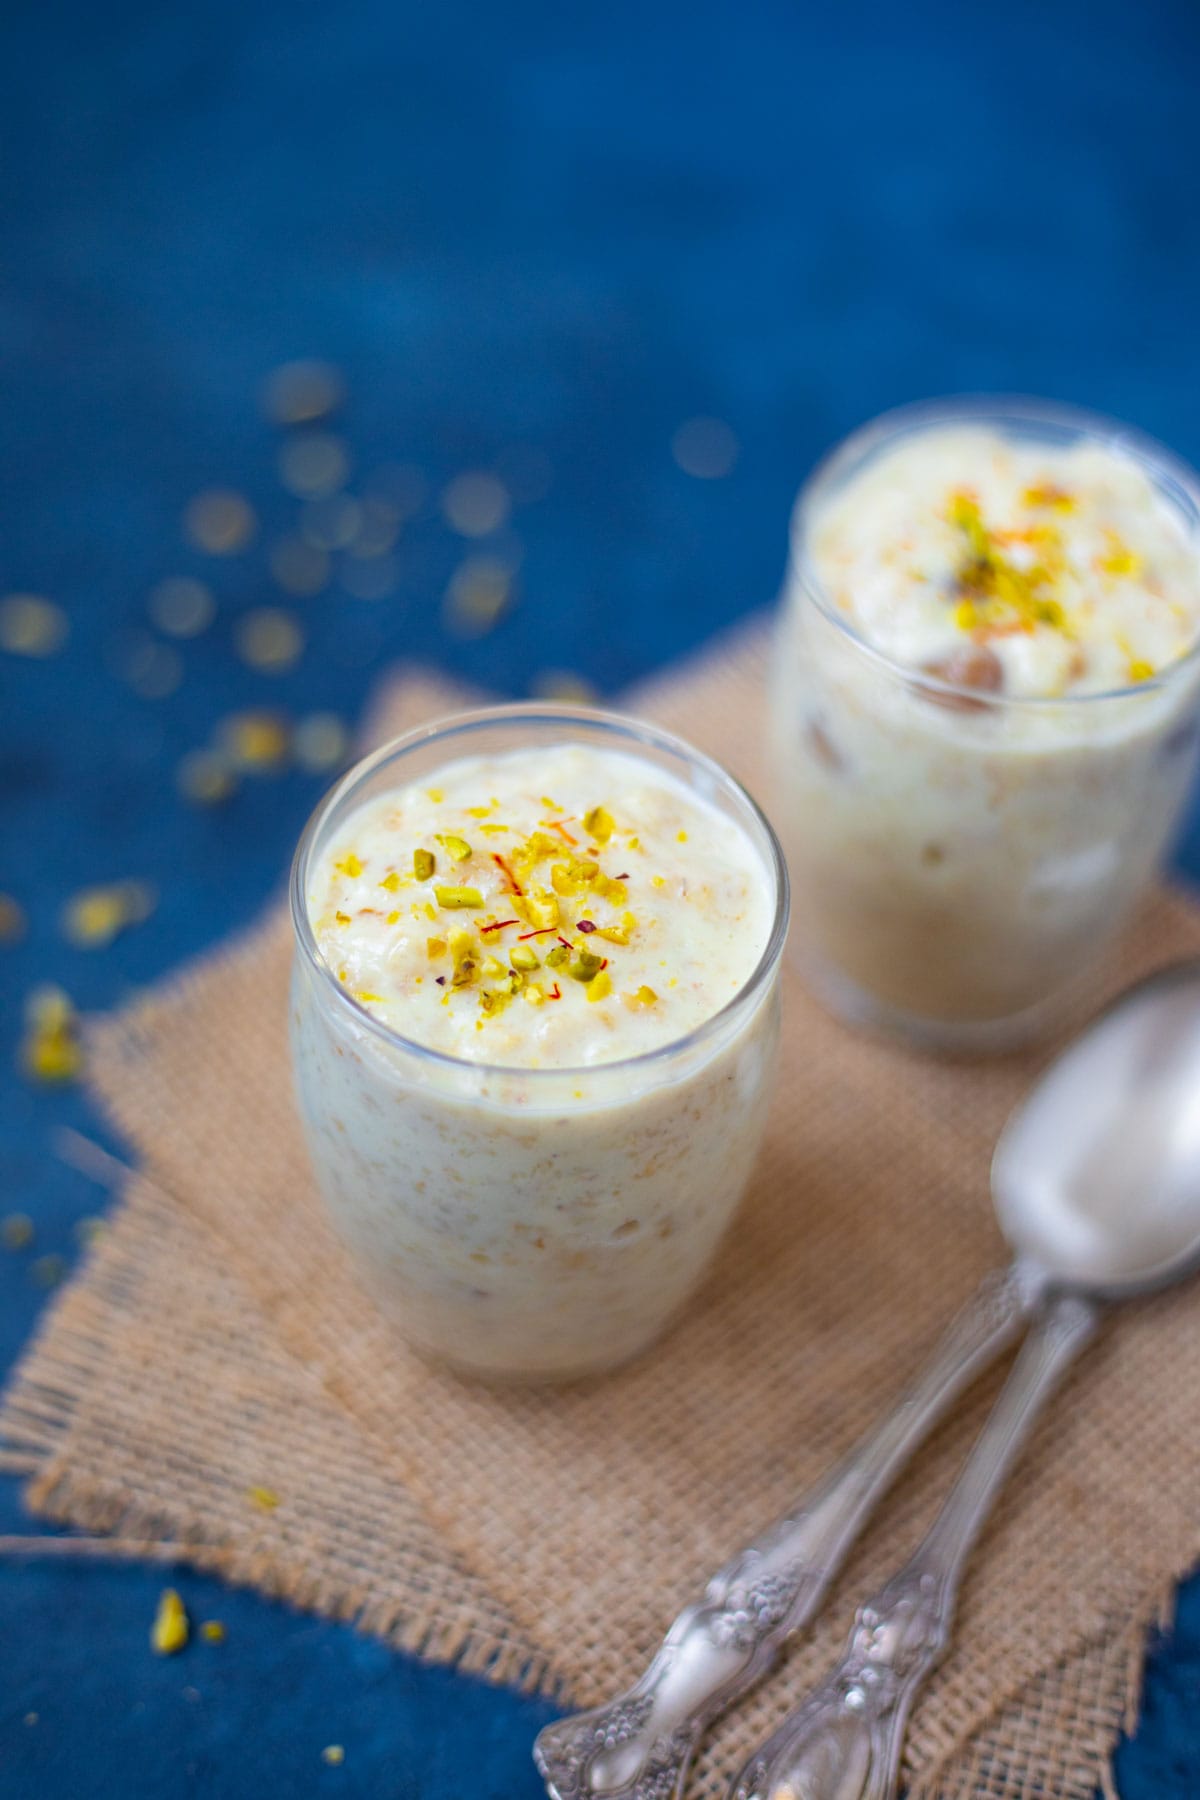 Oats Kheer (Indian oats recipe) garnished with saffron and pistachios.